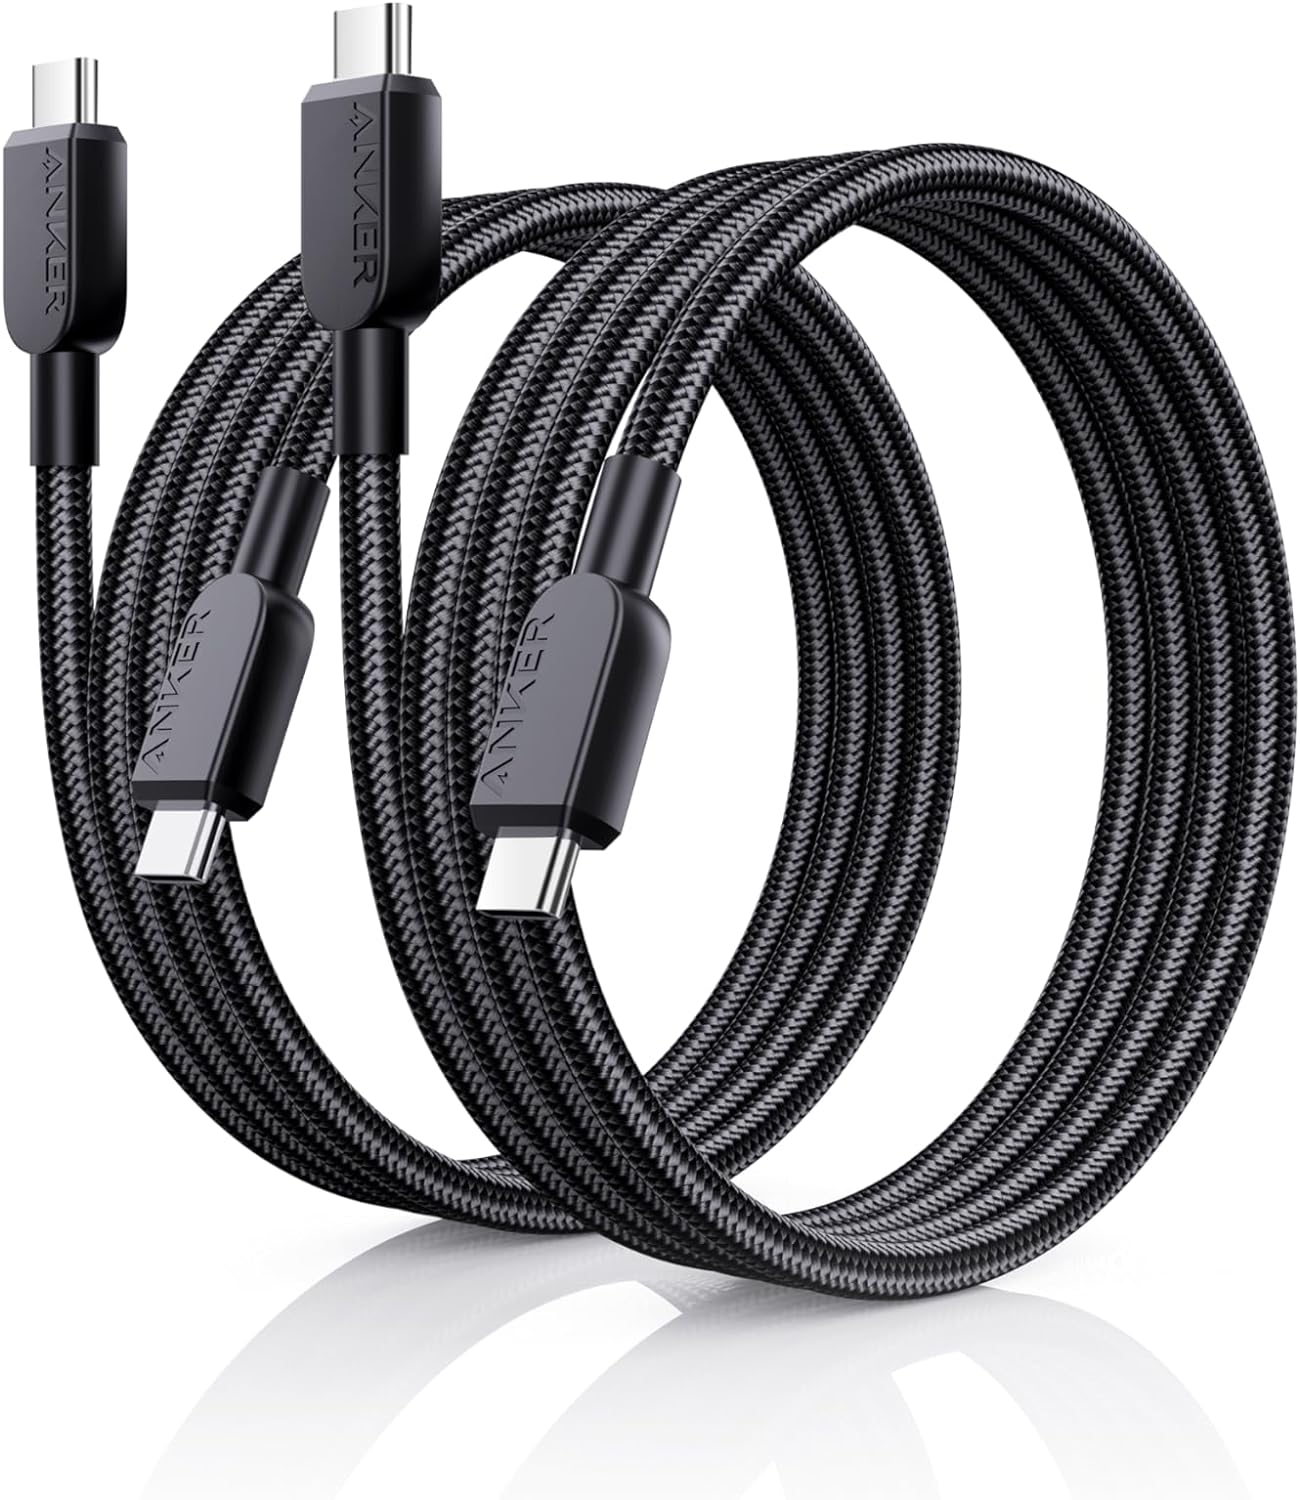 Anker 543 USB C to USB C Cable (240W, 10ft) - Anker US